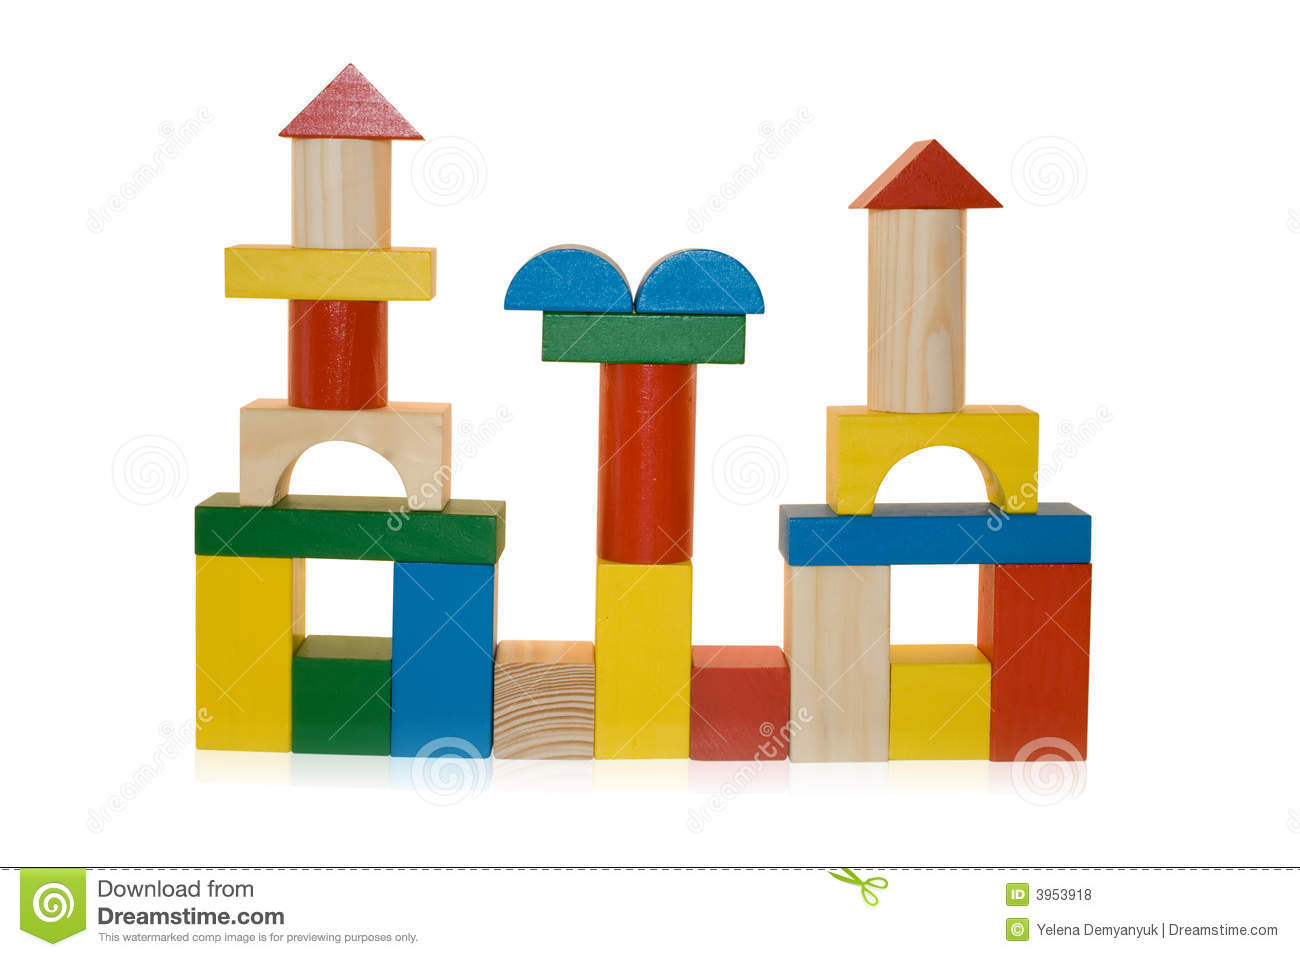 Building Made By Wooden Blocks Royalty Free Stock Photos   Image